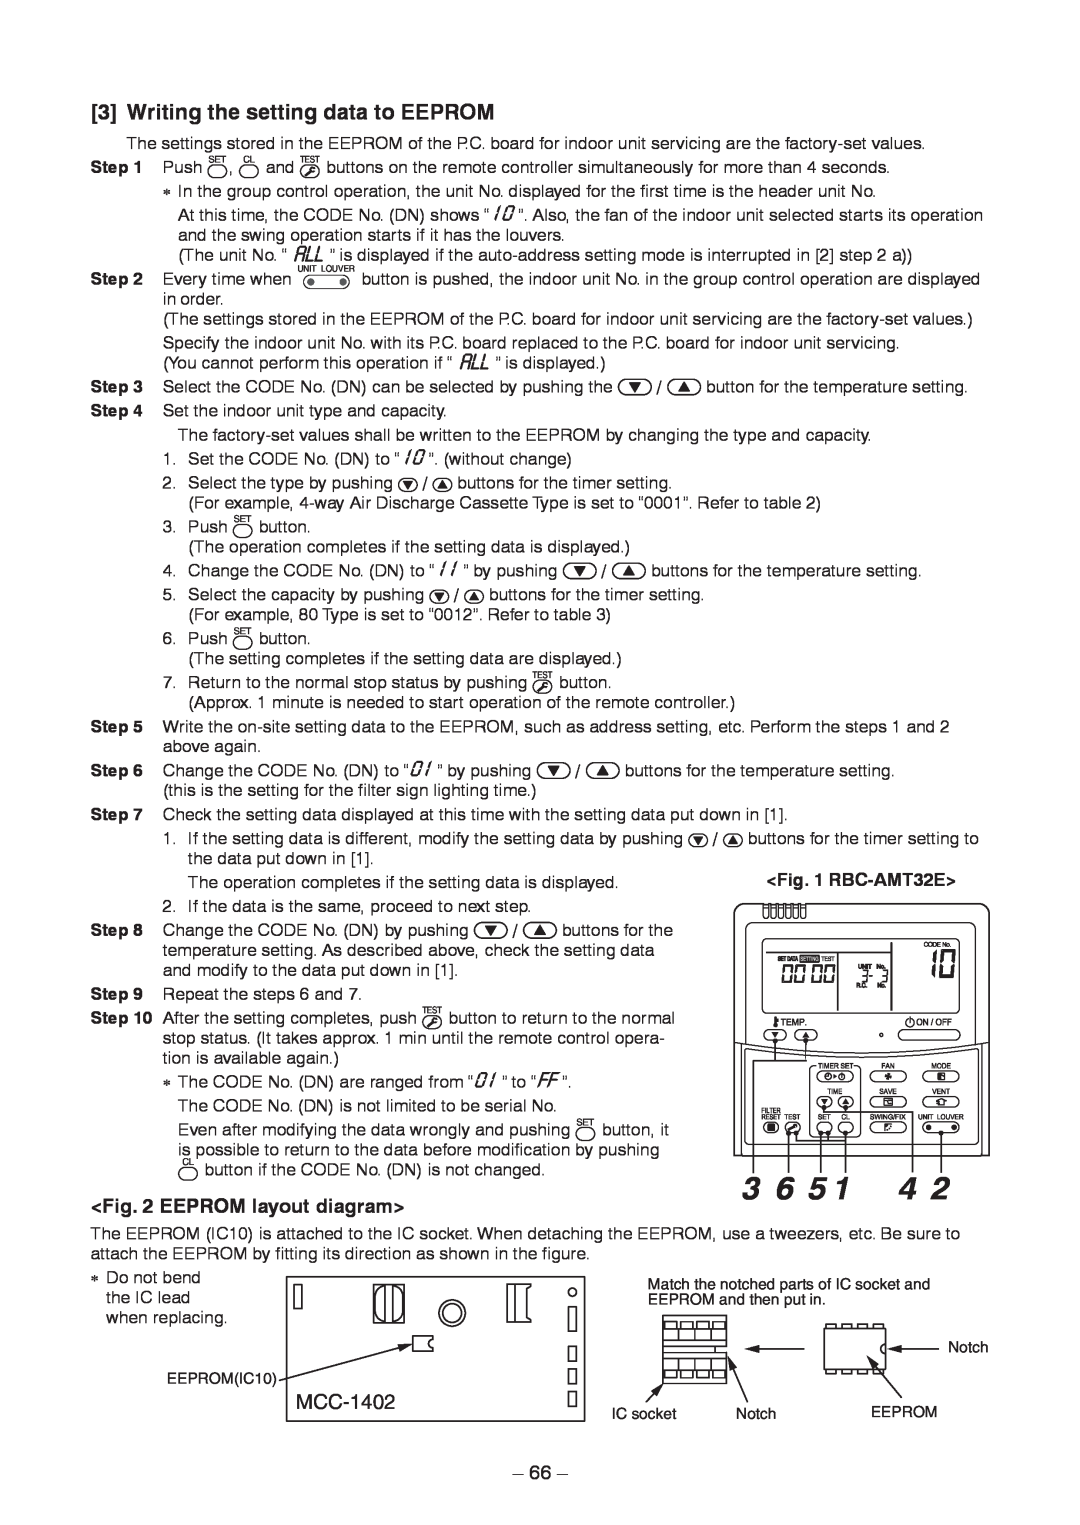 Toshiba CEILING TYPE, CONCEALED DUCK TYPE service manual 3 6 5, < EEPROM layout diagram>, MCC-1402, < RBC-AMT32E> 